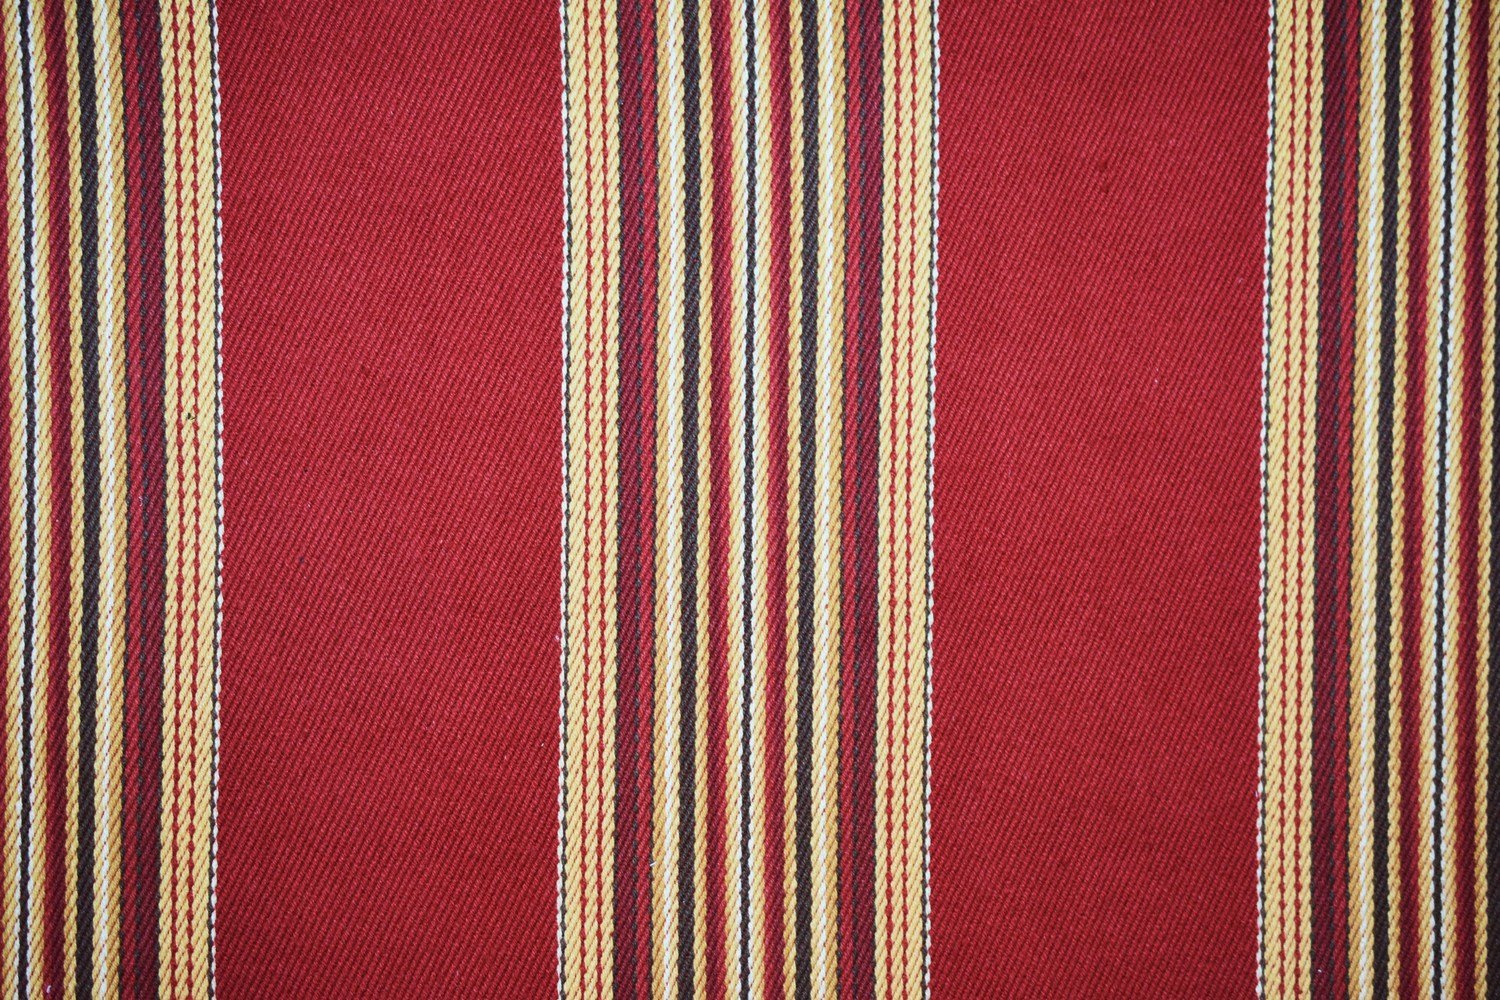 SVF23-Red/Gold Stripe, Only need a sample?: No